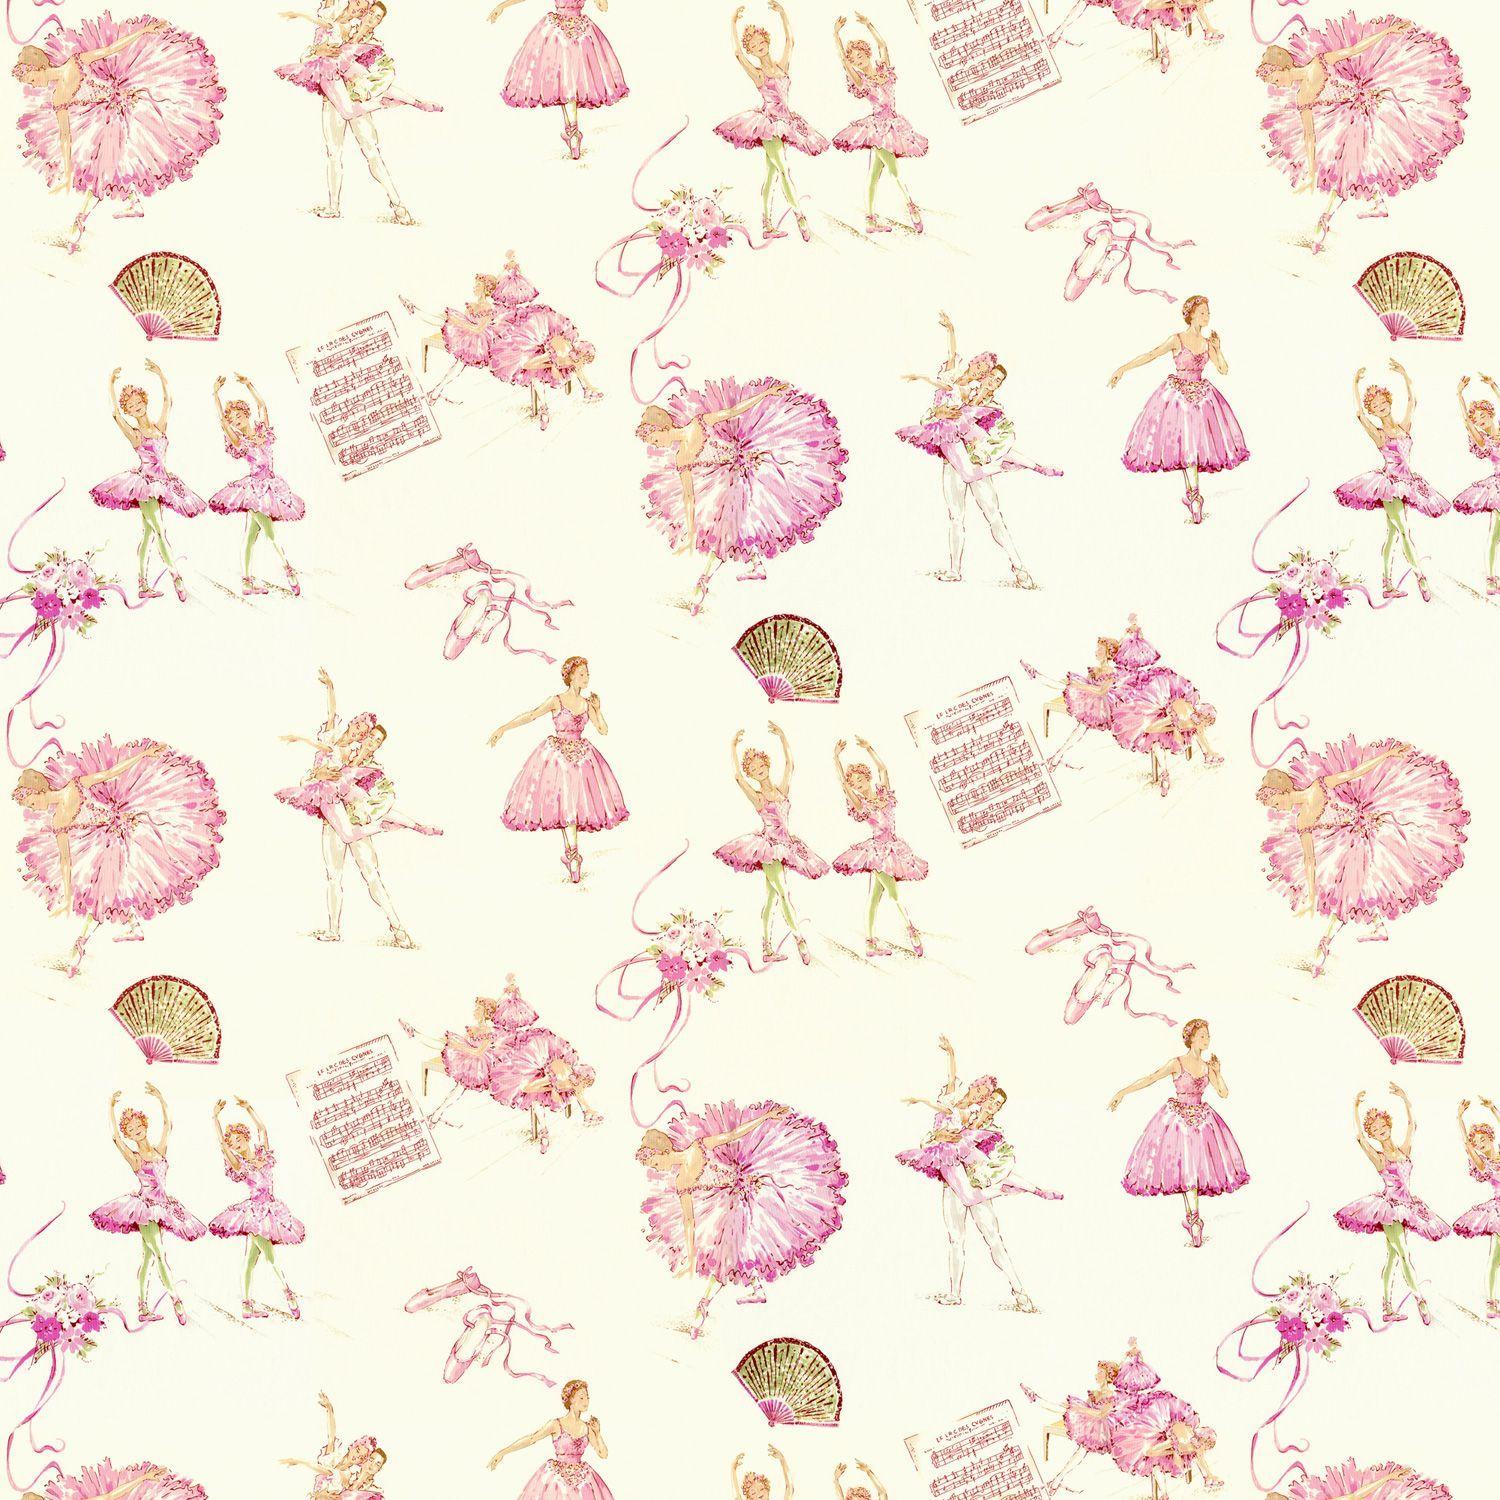 Royal Ballet Fabric by the Yard. Carousel Designs. Fabric